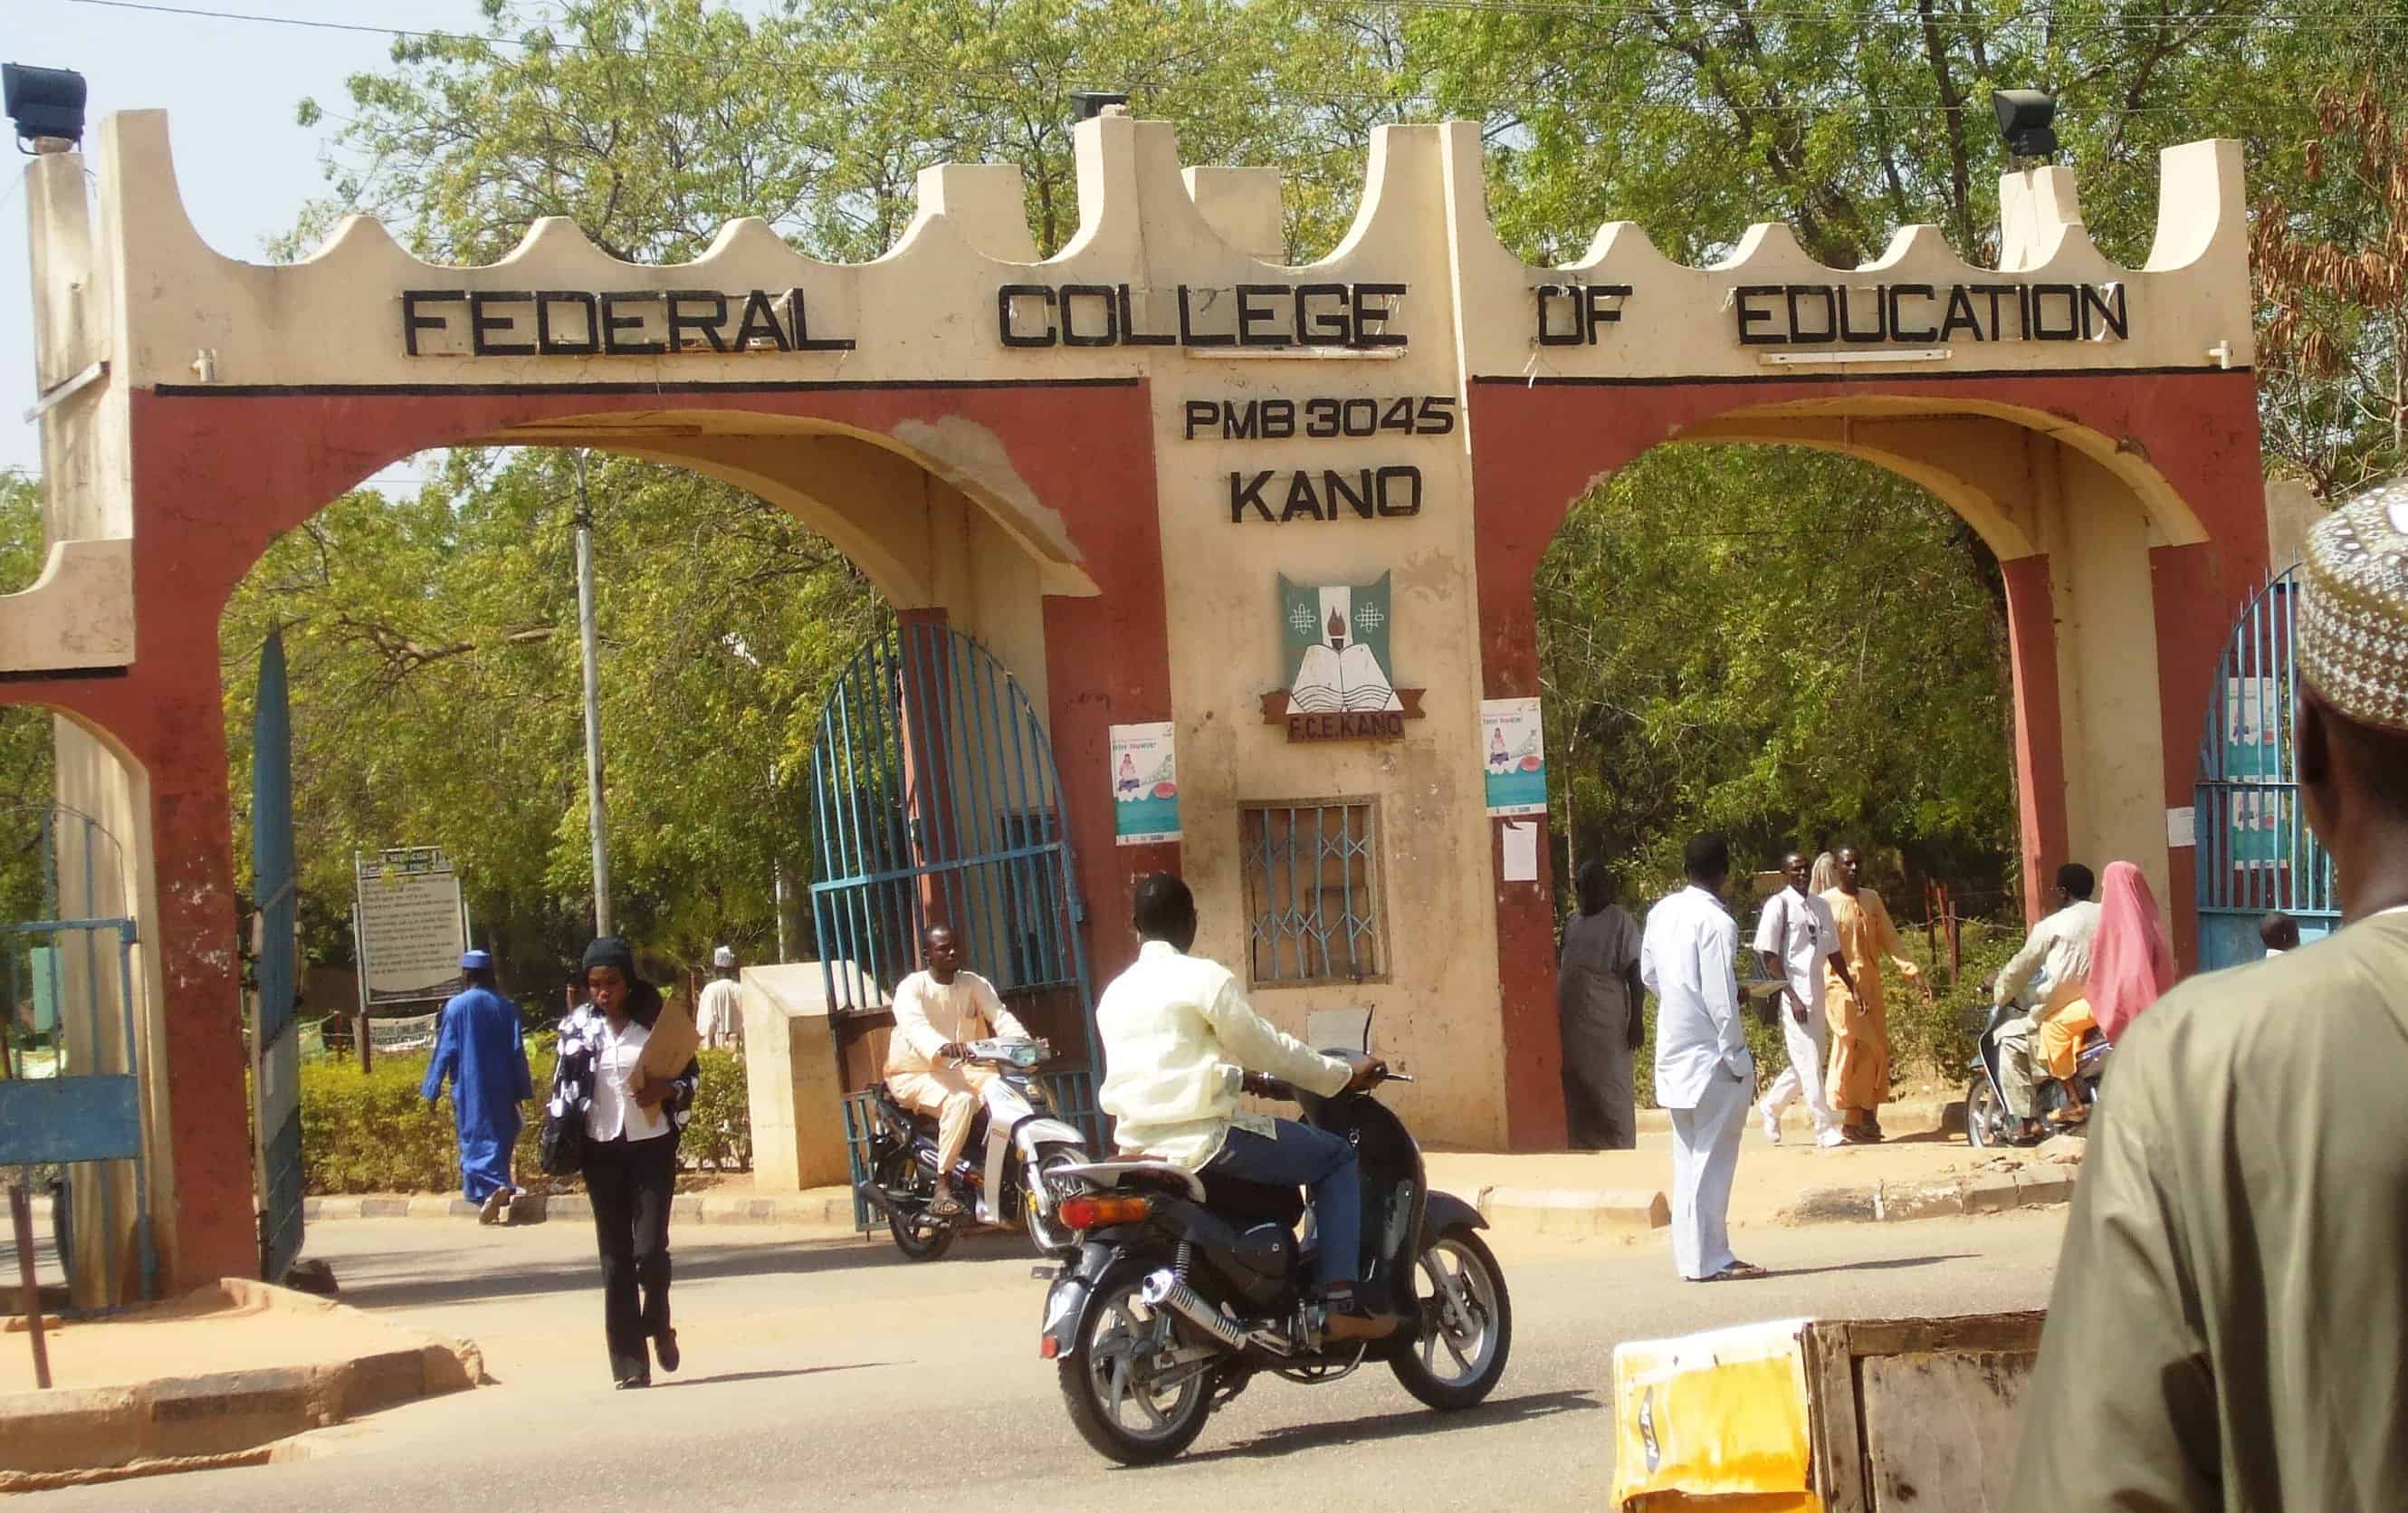 Federal College of Education (FCE) Kano NCE Part-Time Admission Form